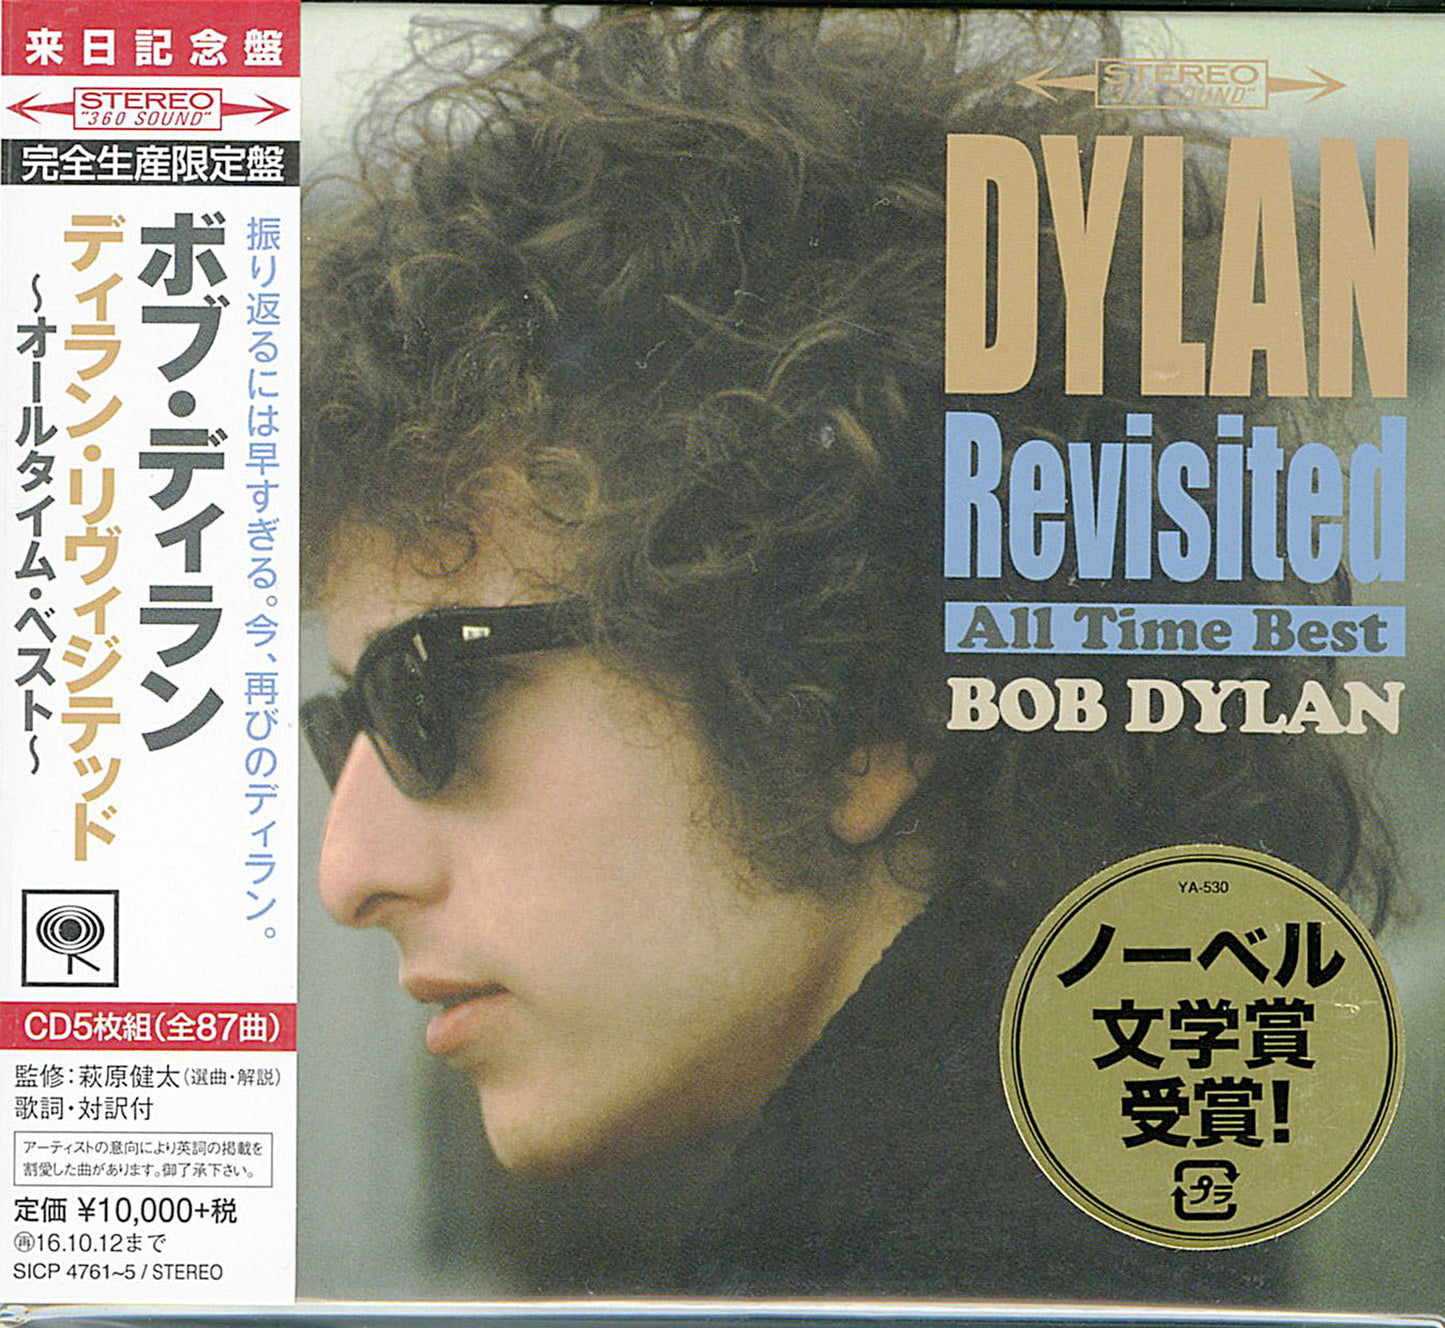 Bob Dylan - Dylan Revisited All Time Best - Japan 5 CD Limited Edition